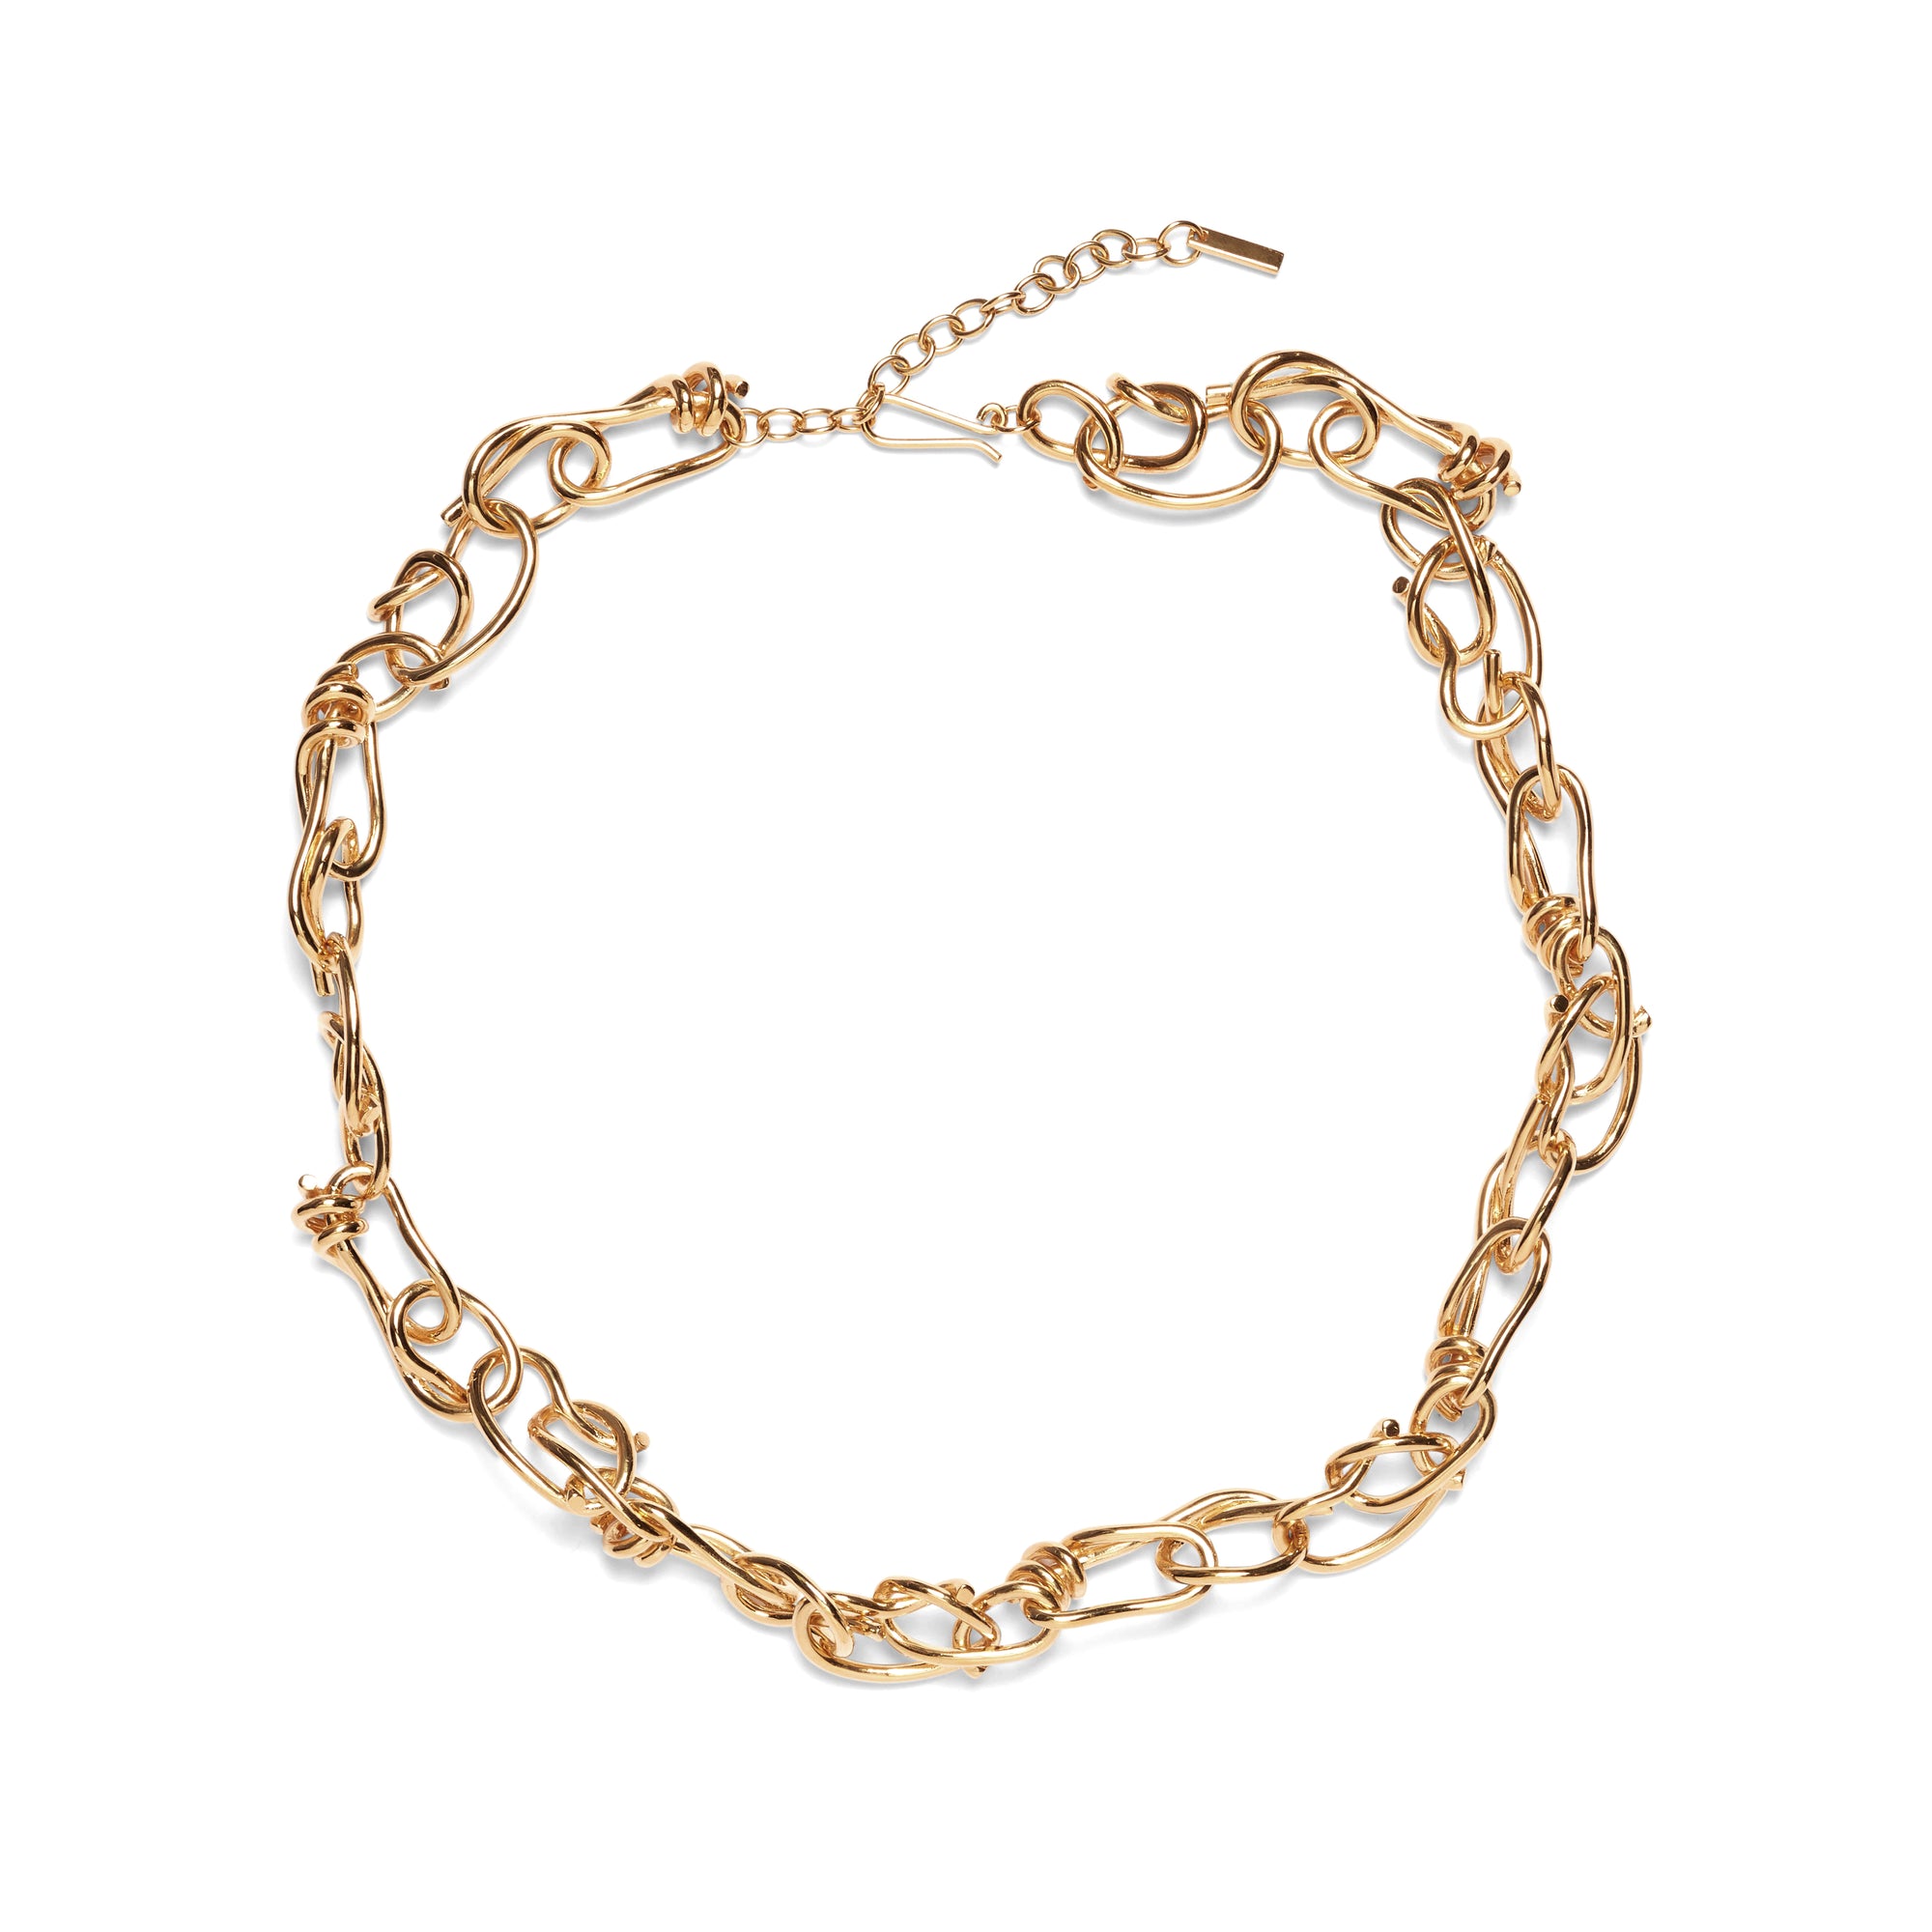 Completedworks - DSM Exclusive Knotted Chain - (Yellow Gold) view 1